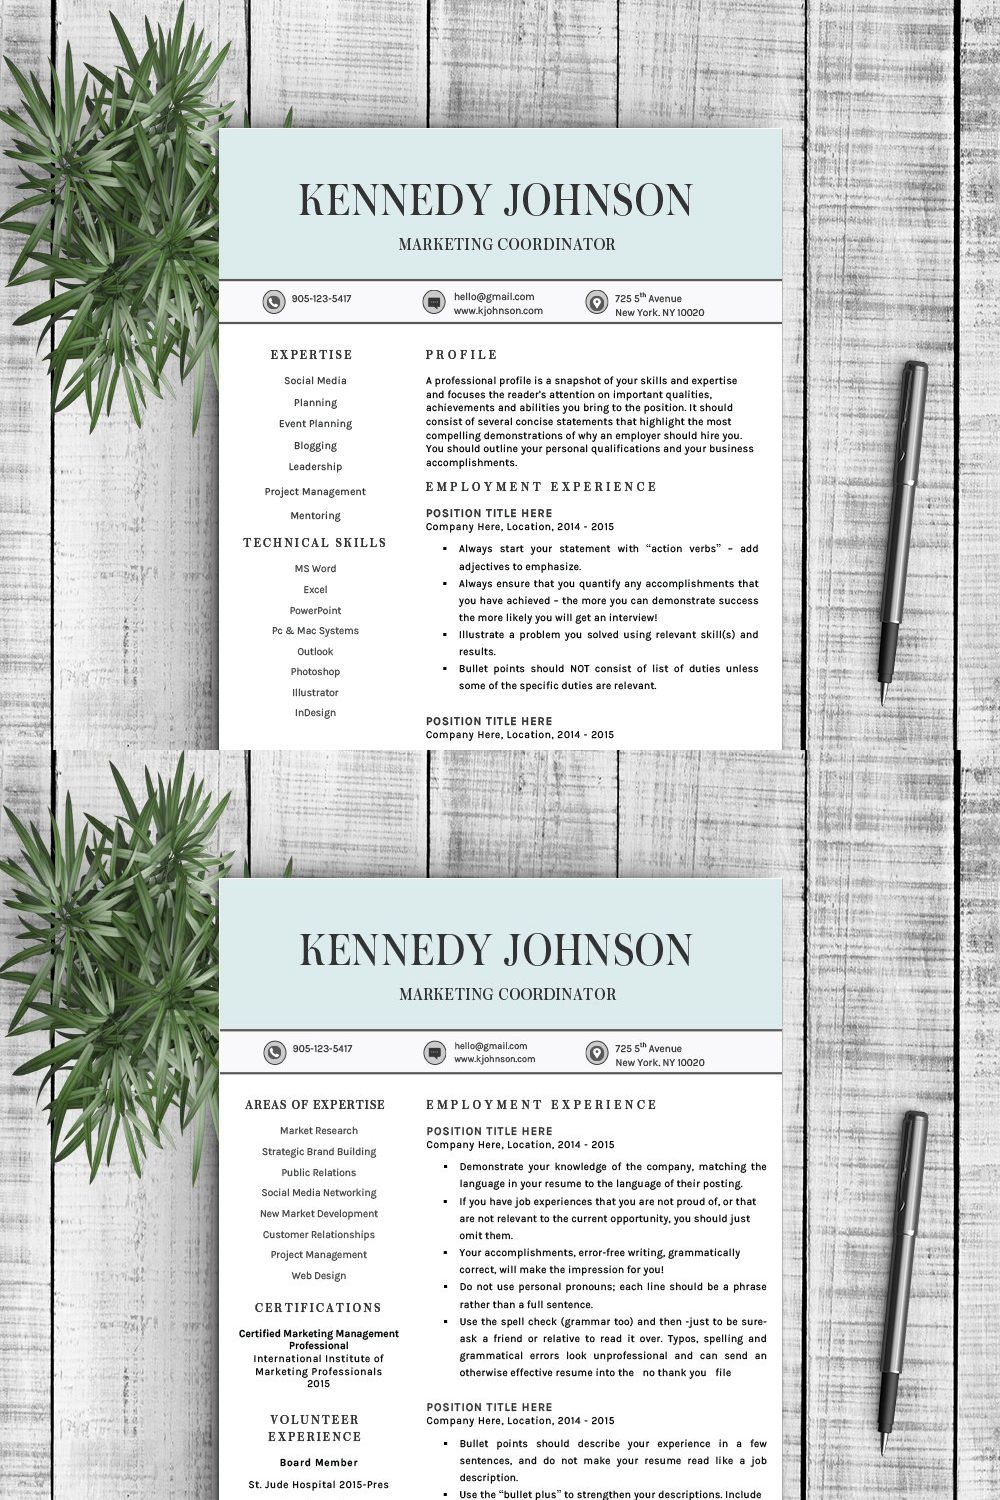 Resume Template "Kennedy" pinterest preview image.